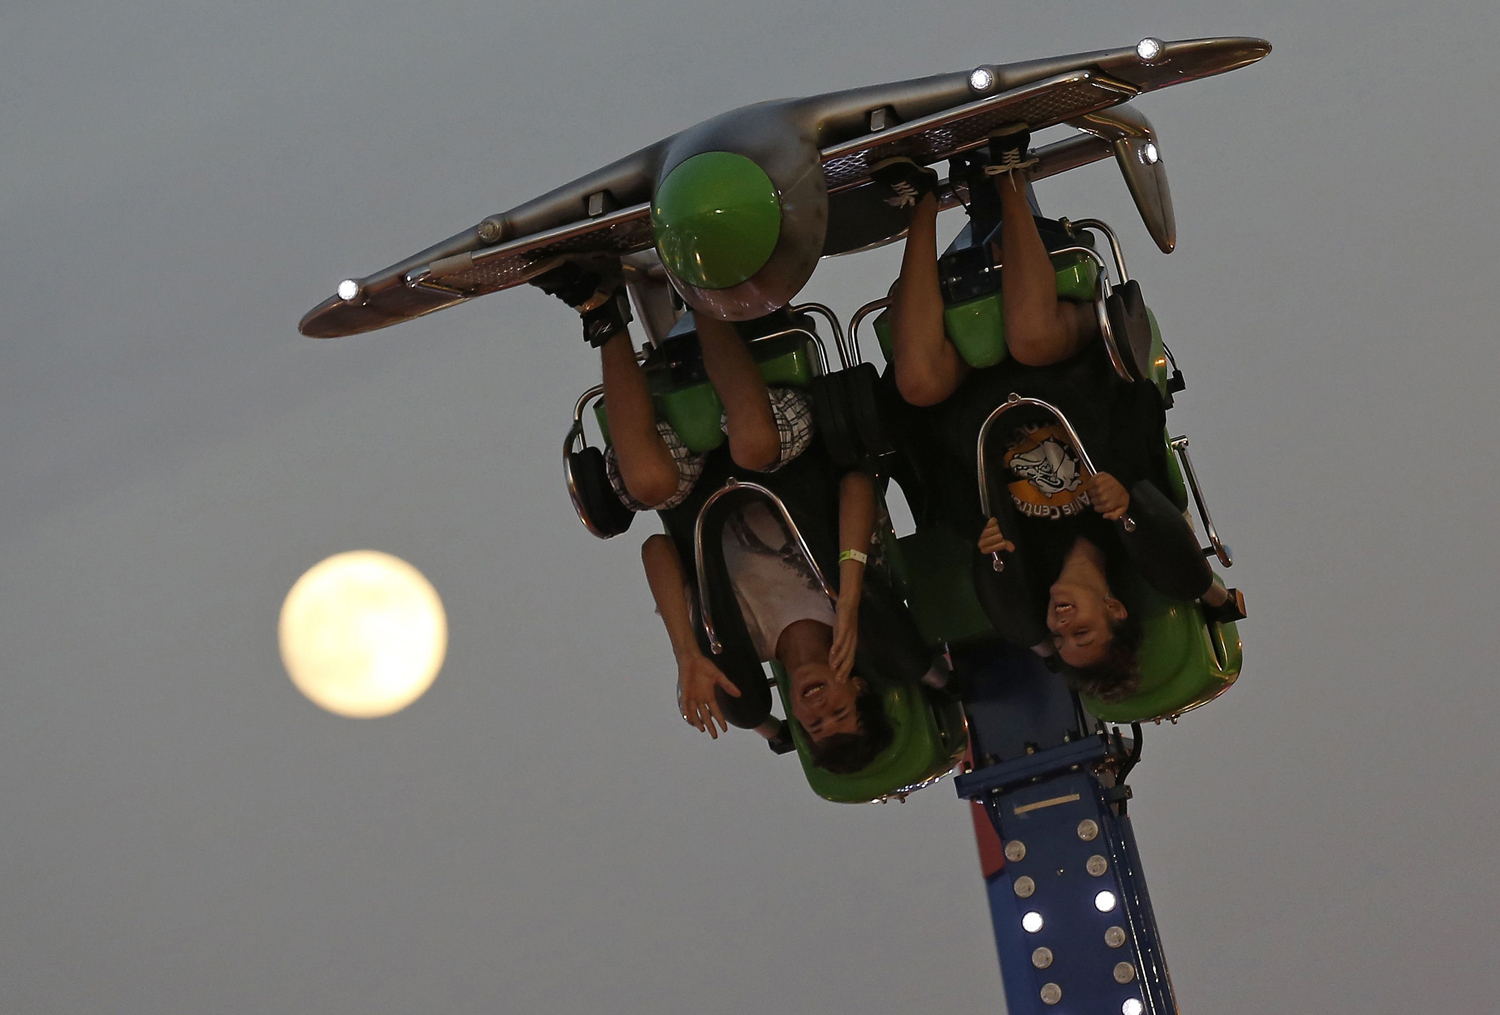 Aug. 9, 2014. The moon is seen in the background as people ride upside down at the Wisconsin State Fair in West Allis, Wisconsin.